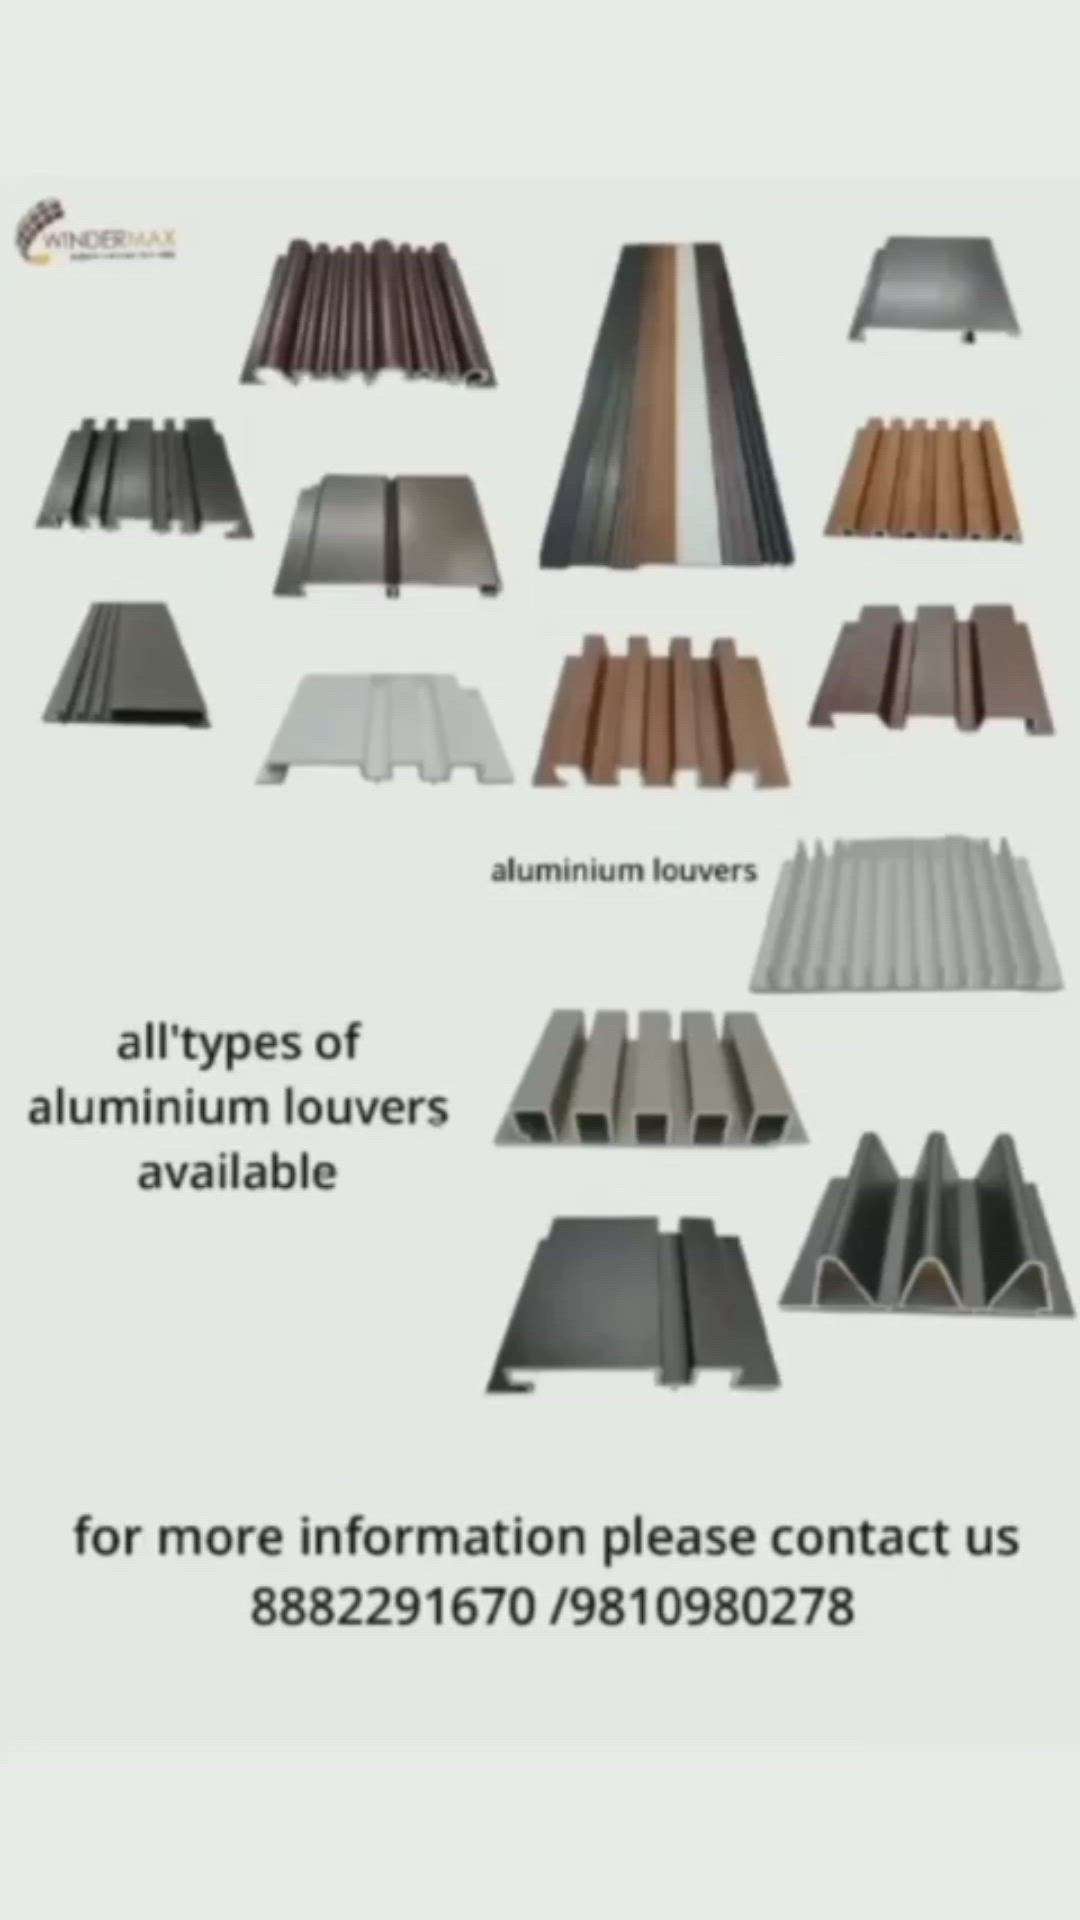 Hello dear sir /mam 

We are informing you our company started all types of aluminium louvers and profiles for Exterior and interior use 

Any requirement or query now or in future please contact us  

Note ;.   
30 design available in louvers
50 colours available in coating
20+ gate profile available

For more details or samples required please contact us 

Regards
Winder max India 
9810980278 #AluminiumWindows  #Aluminiumprofilegate #modernhome  #exterior_Work  #wpclouvers  #aluminiumlouvers